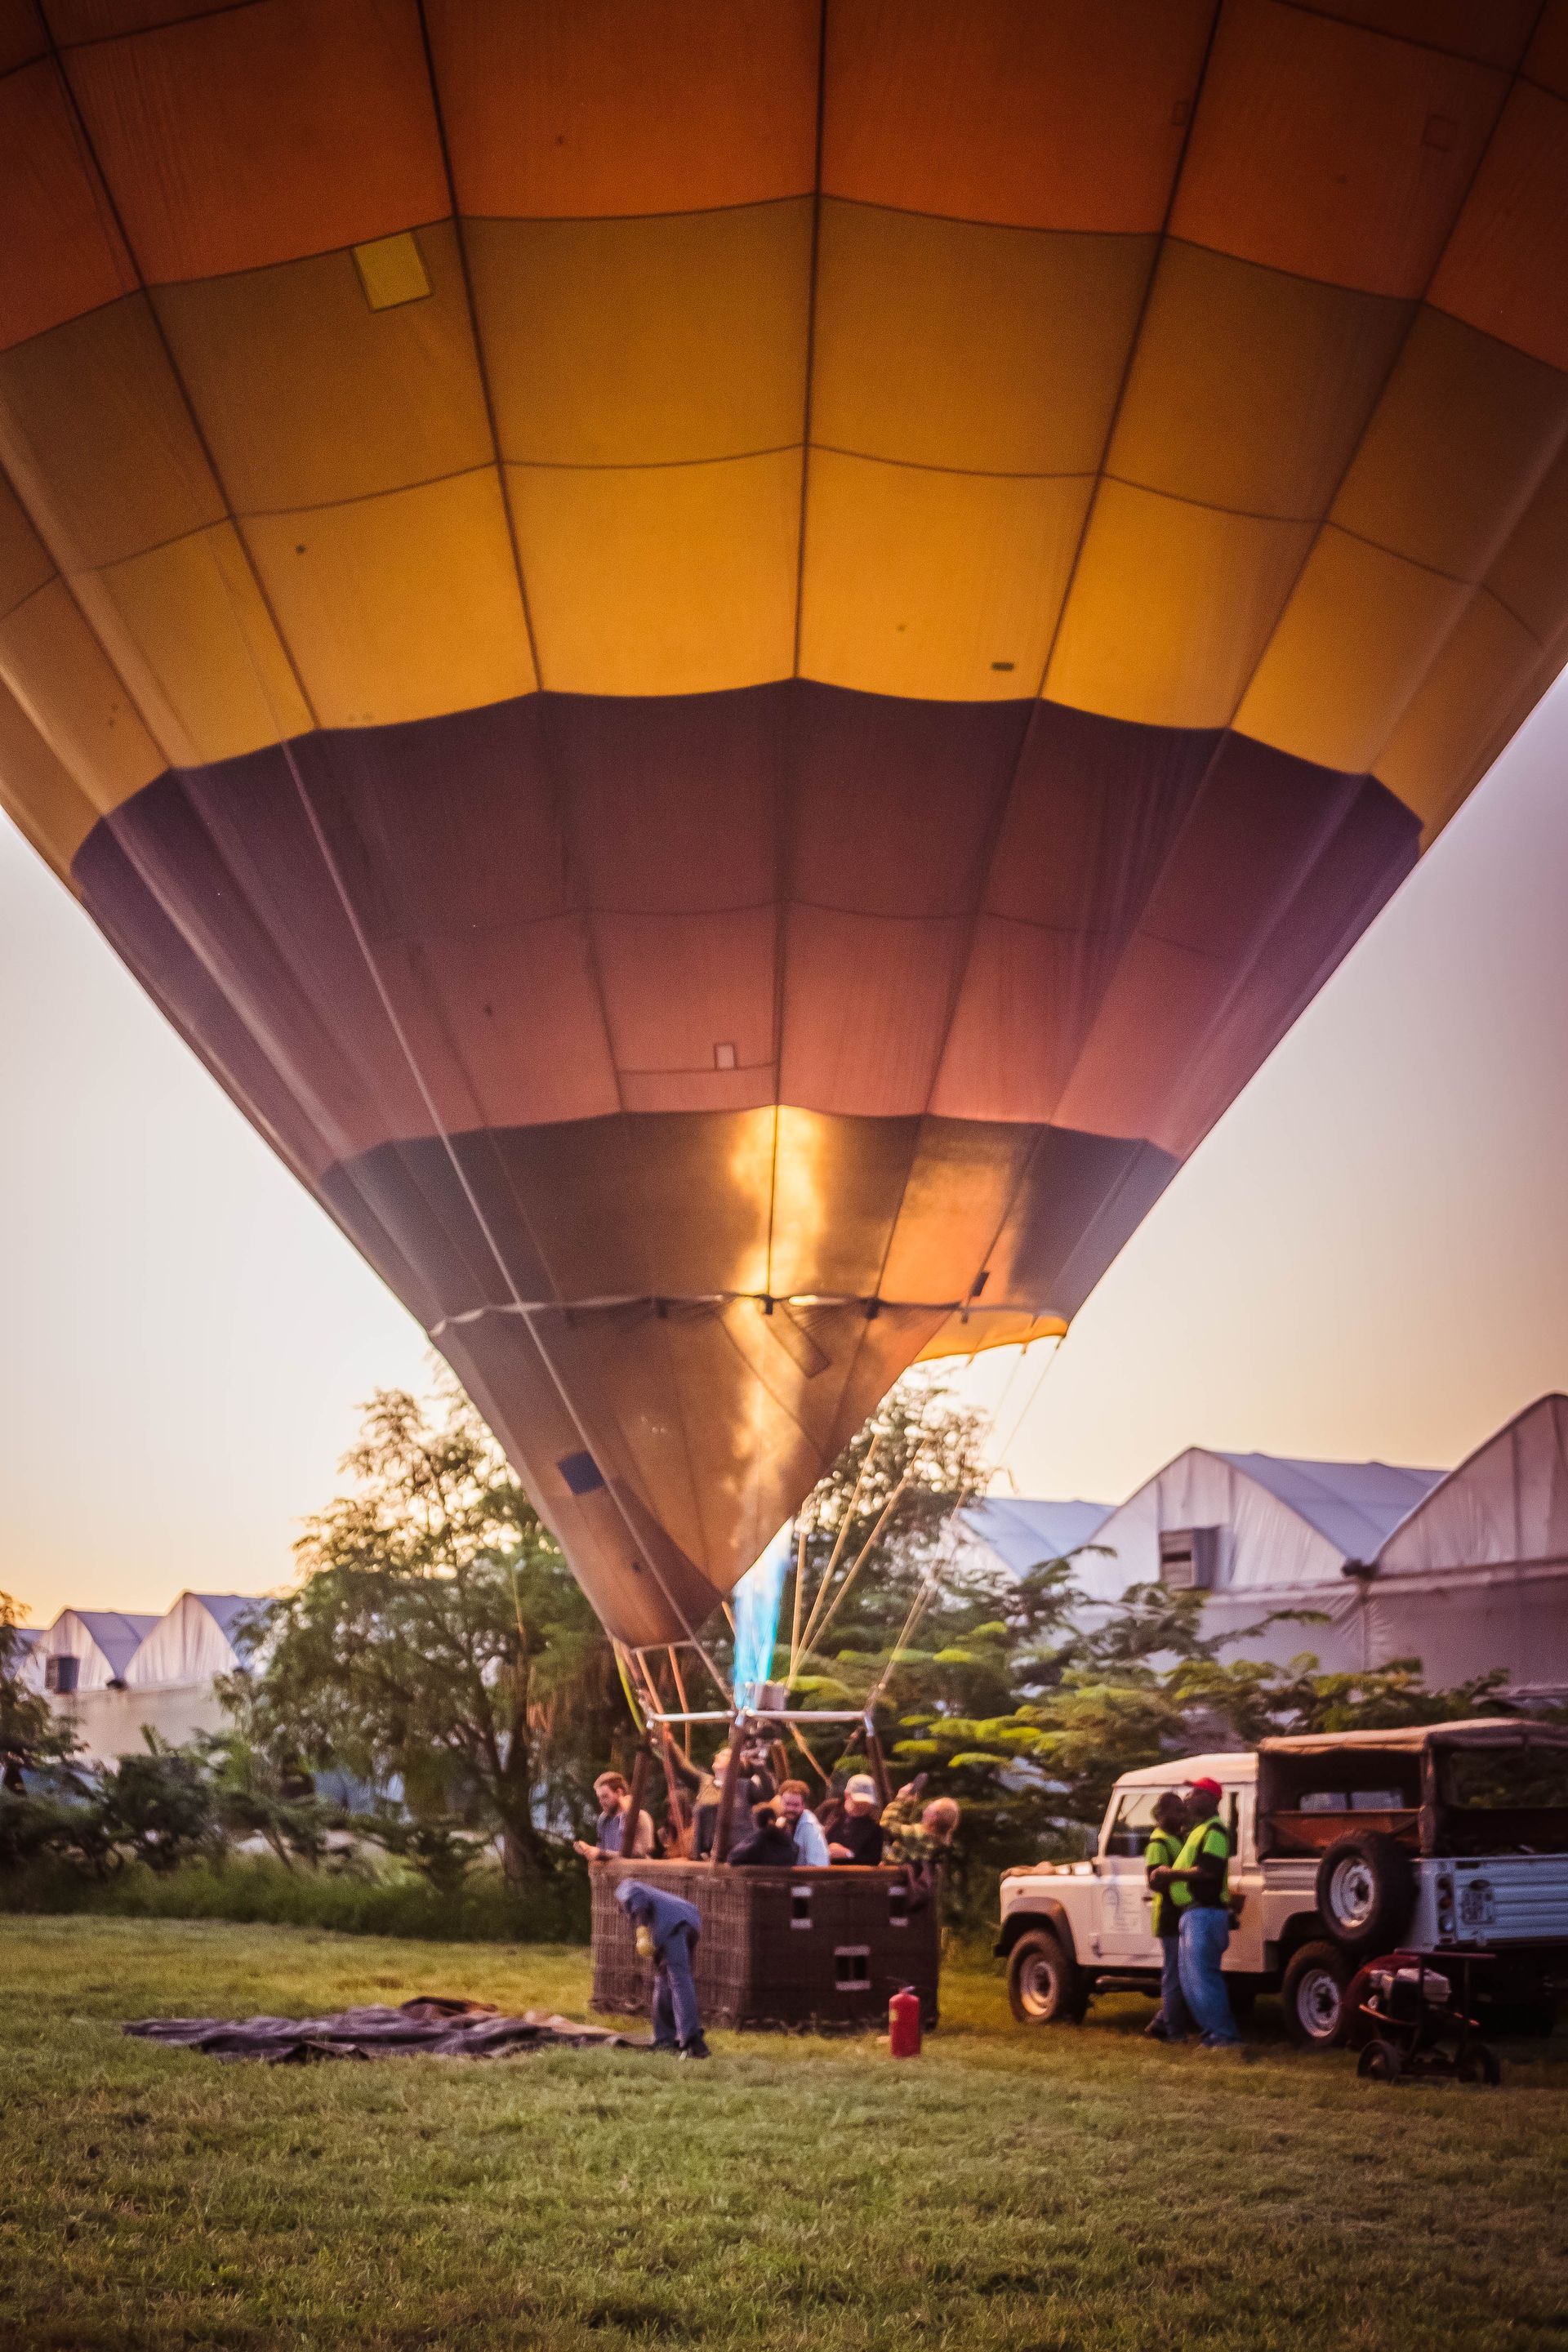 a hot air balloon is being loaded with people